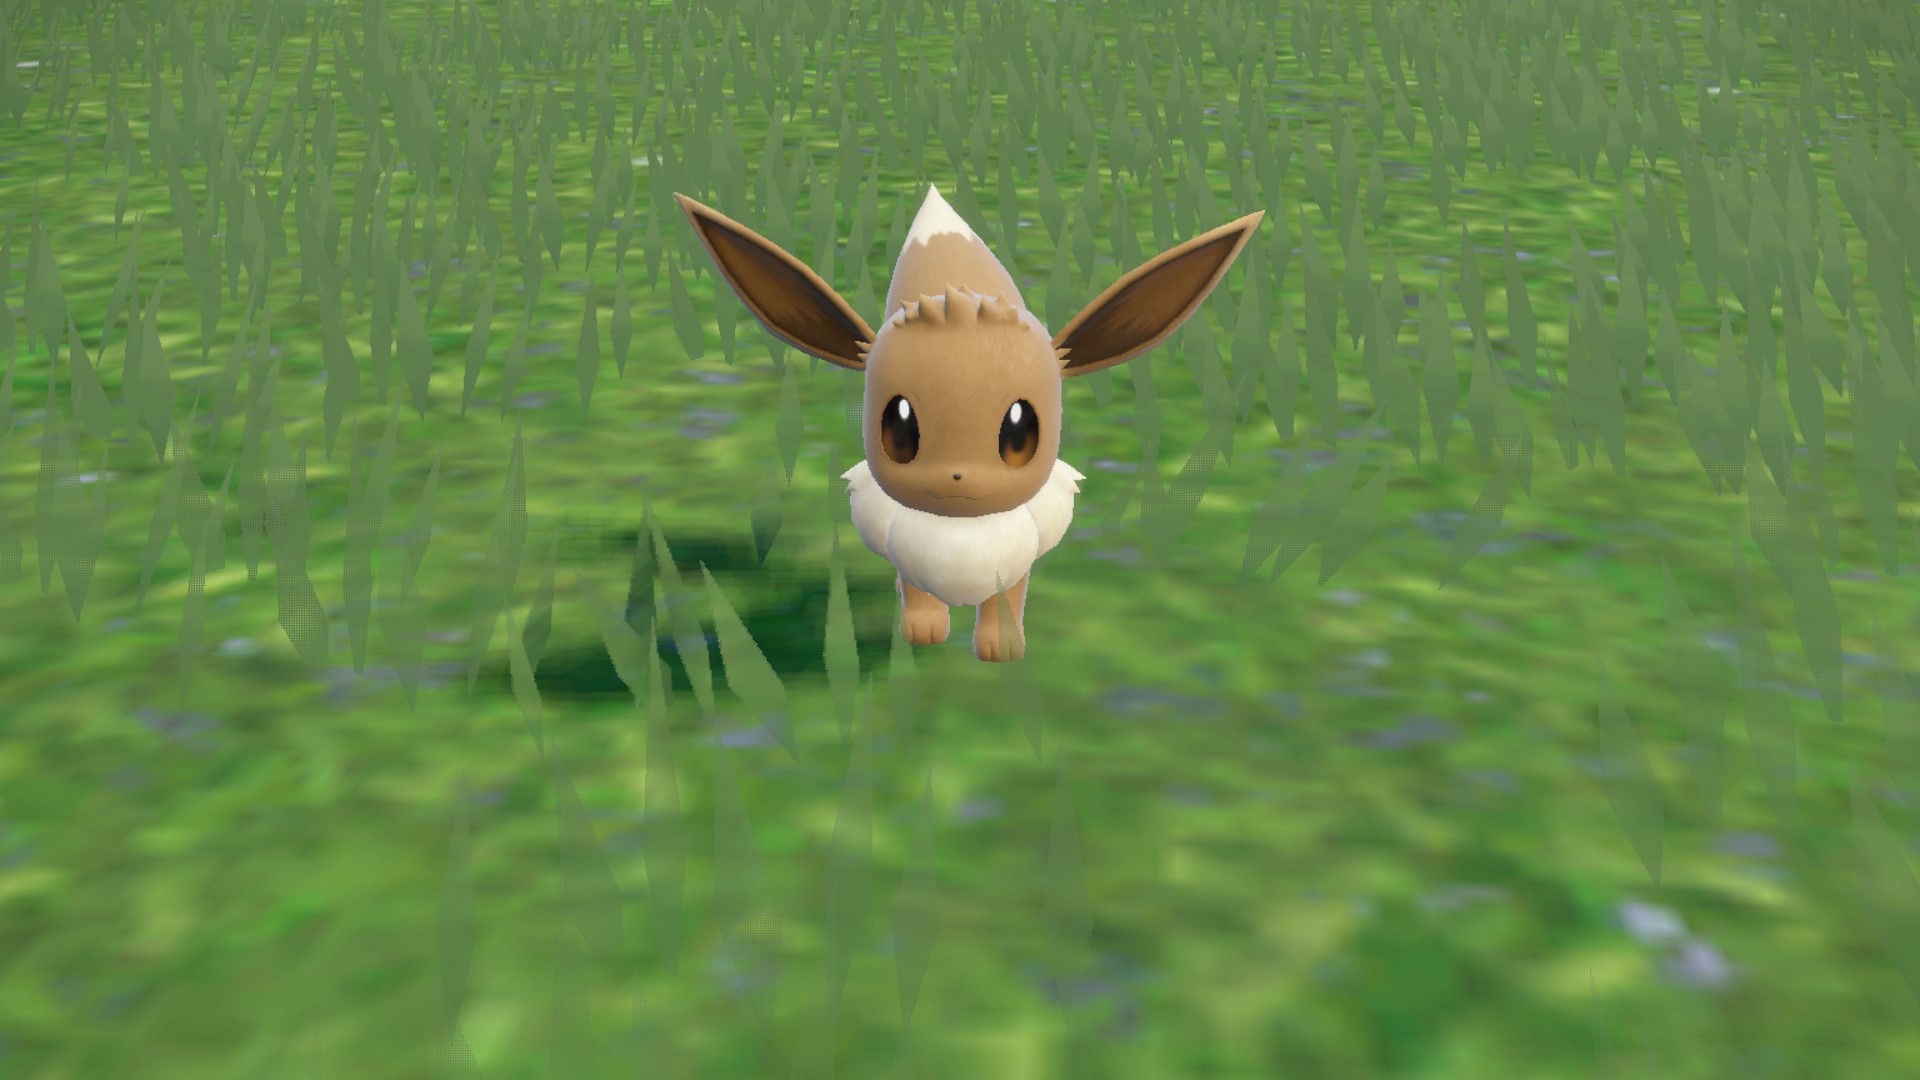 Pokemon Scarlet and Violet: Where to find Eevee in-game